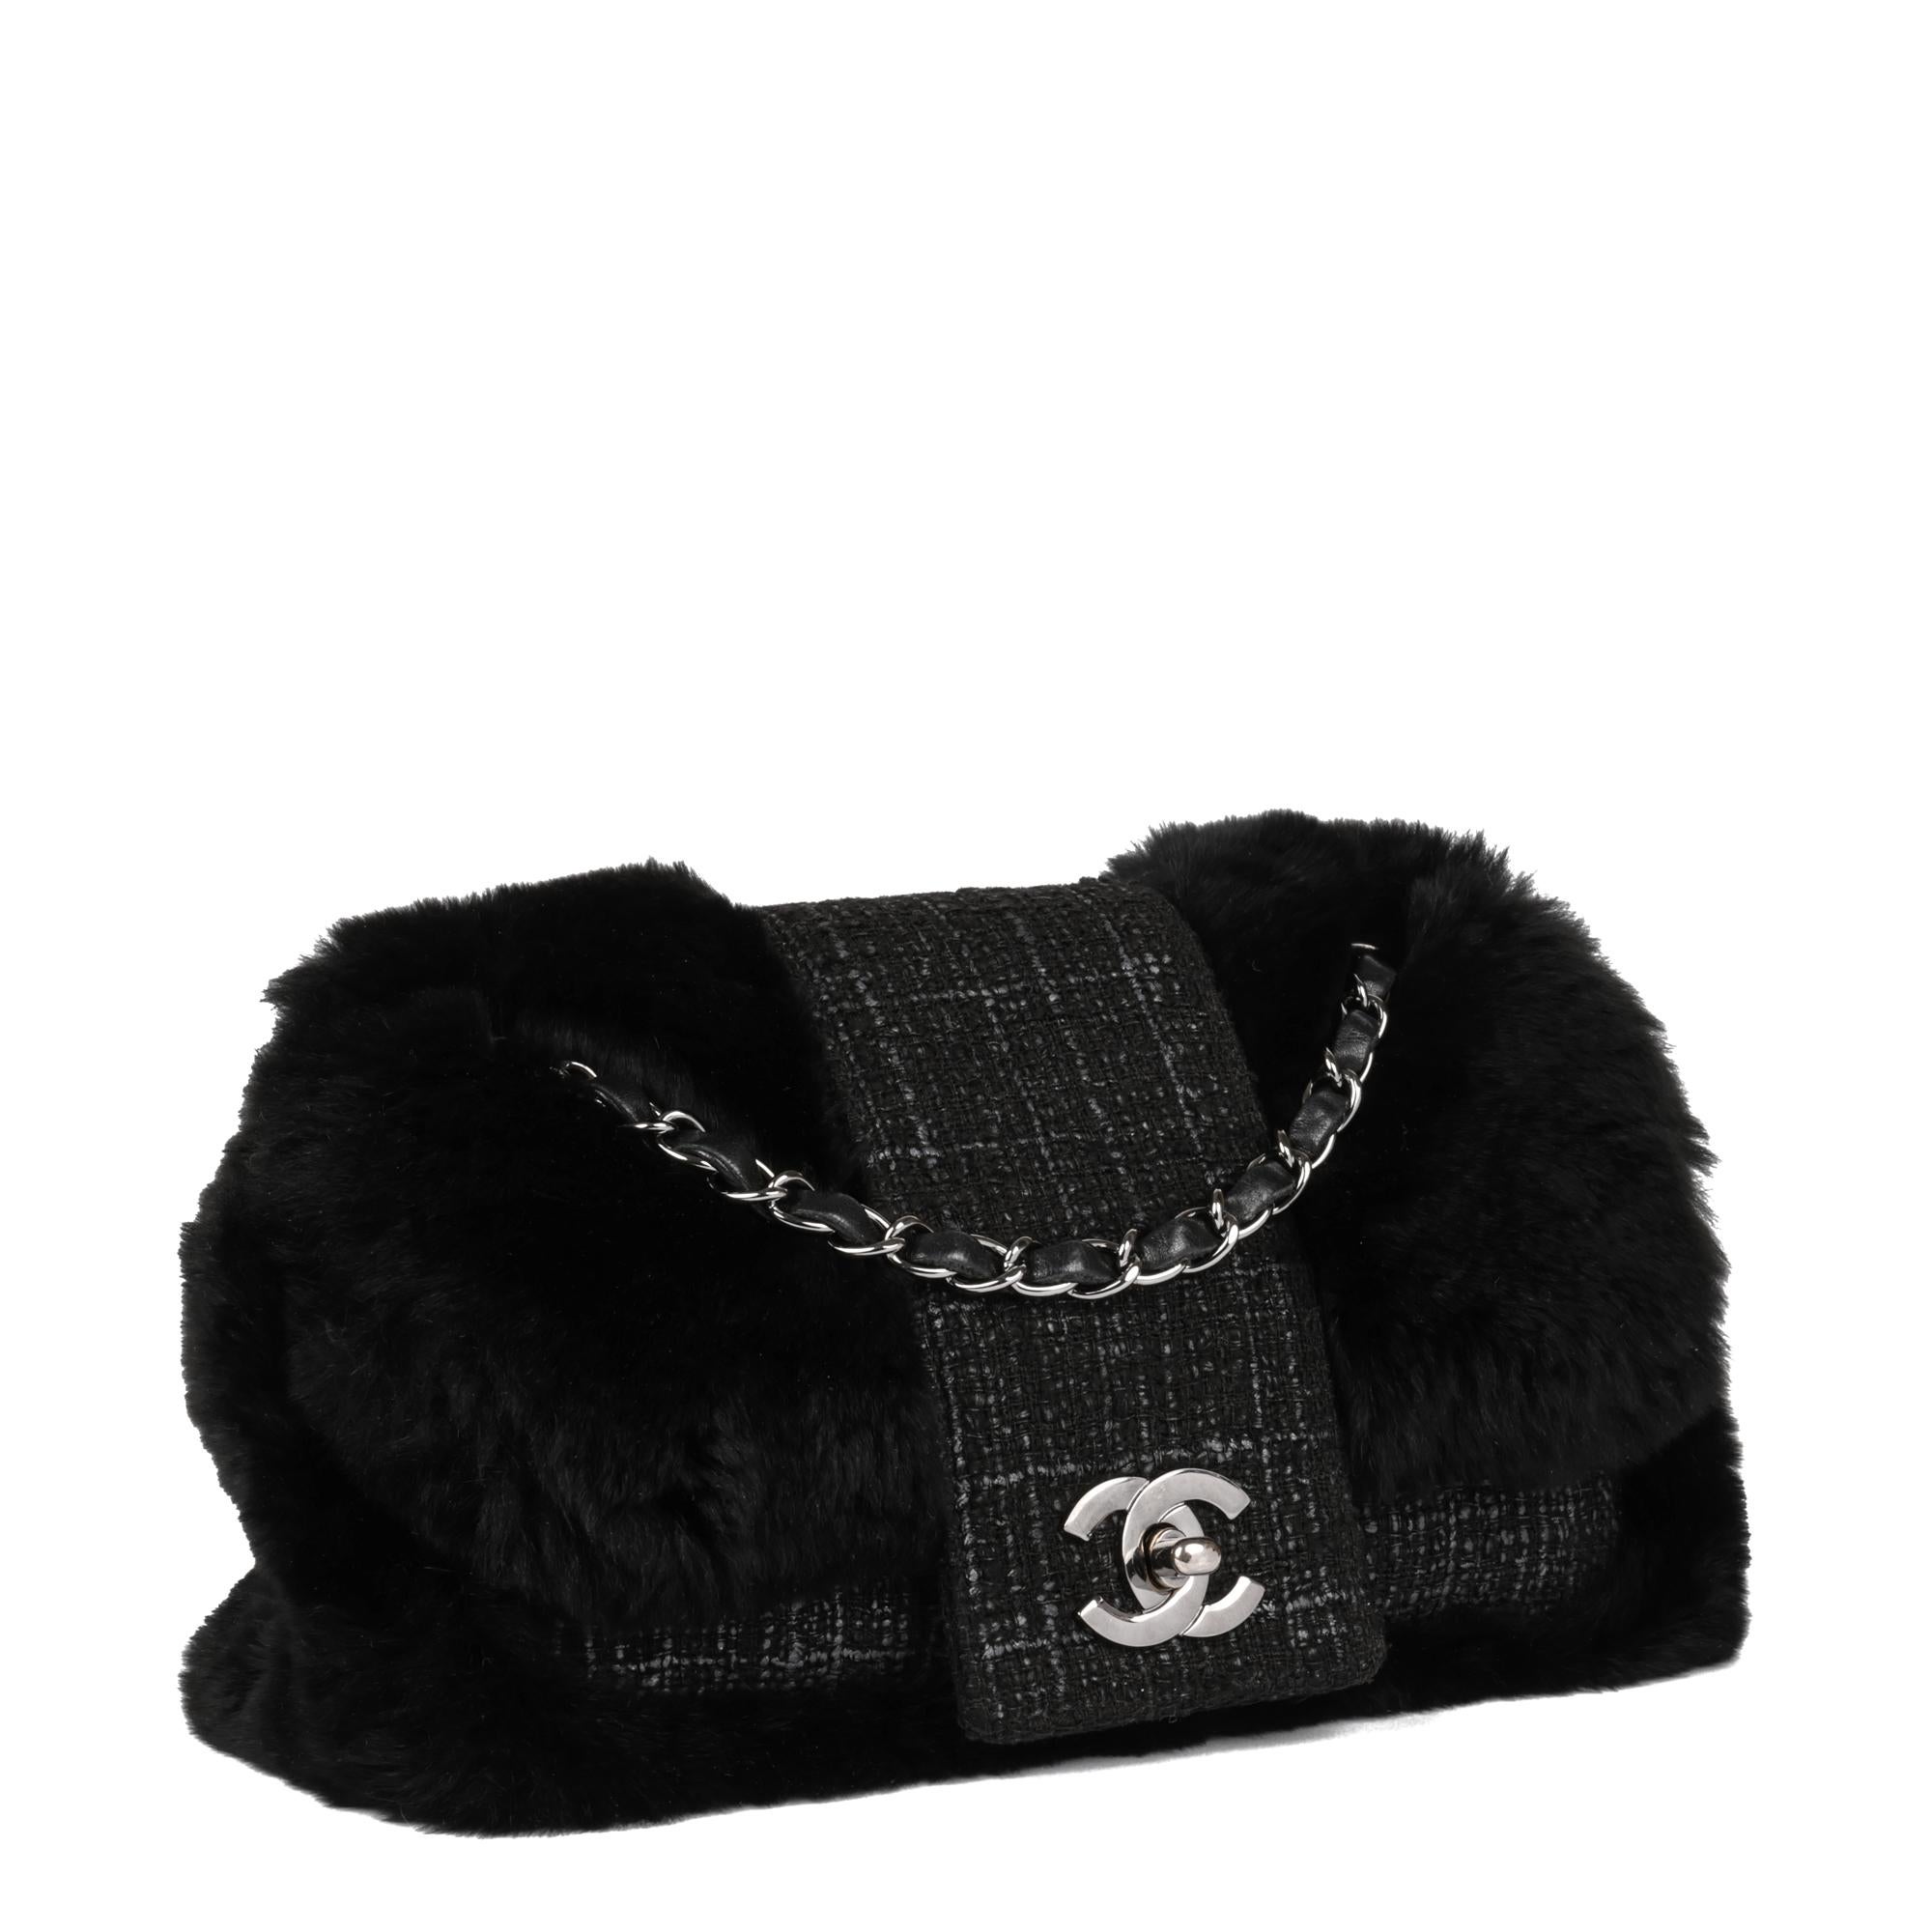 CHANEL
Black Fantasy Fur & Grey Tweed Medium Classic Single Flap Bag

Xupes Reference: HB5156
Serial Number: 10118551
Age (Circa): 2005
Accompanied By: Chanel Dust Bag 
Authenticity Details: Serial Sticker (Made In France) 
Gender: Ladies
Type: